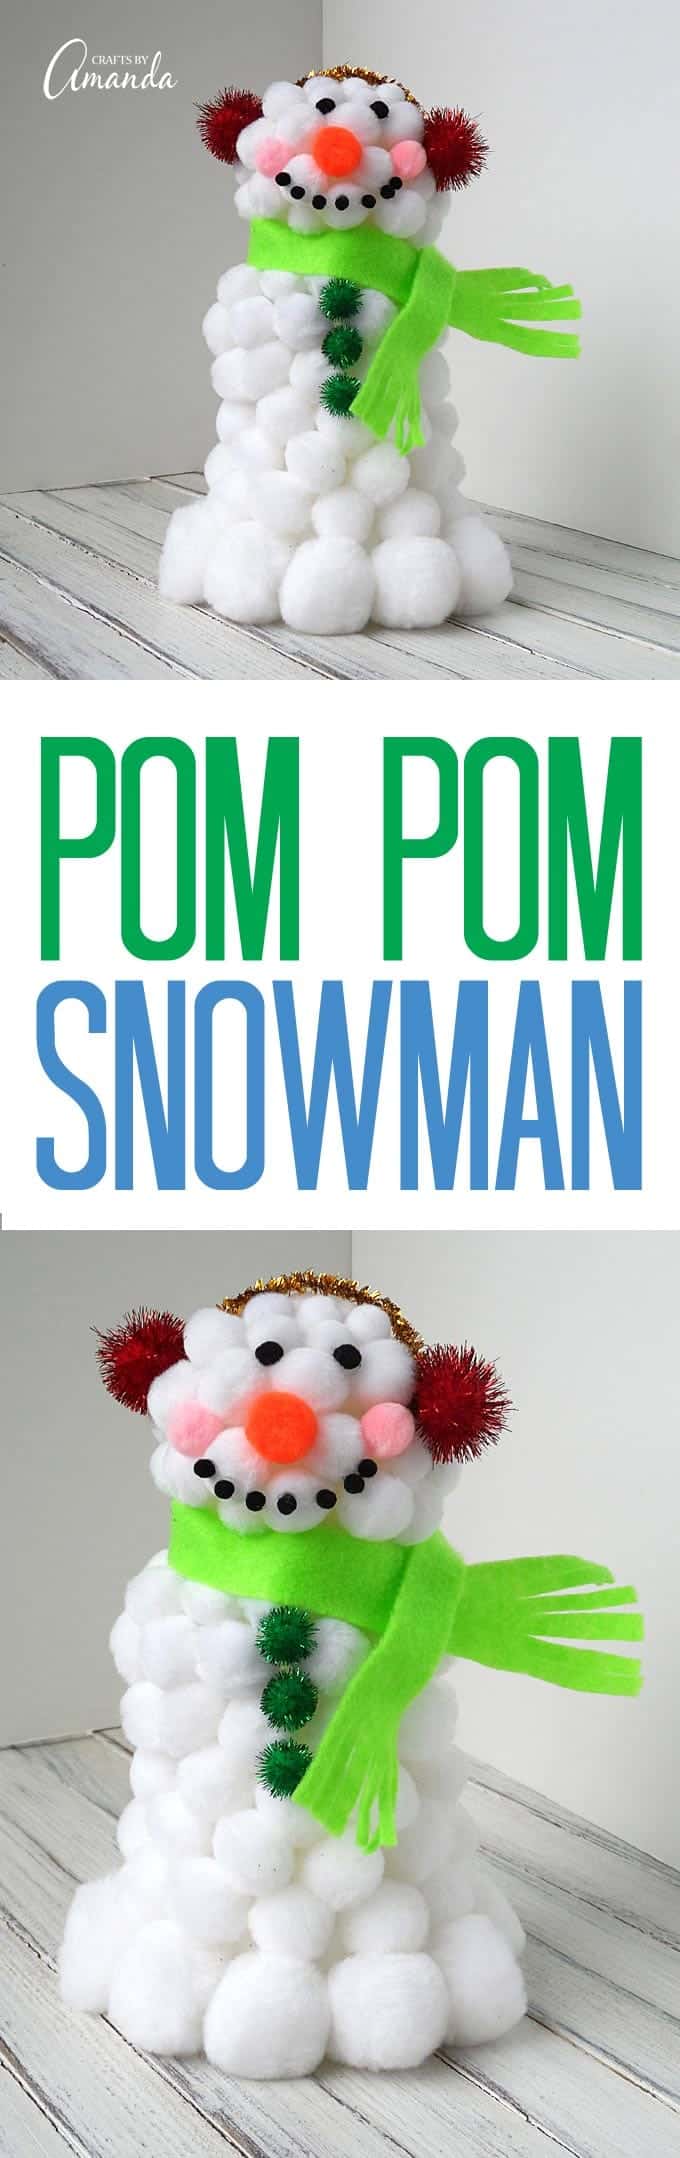 This fluffy pom pom snowman is a fun winter craft that you can enjoy no matter what the weather - no snow required!